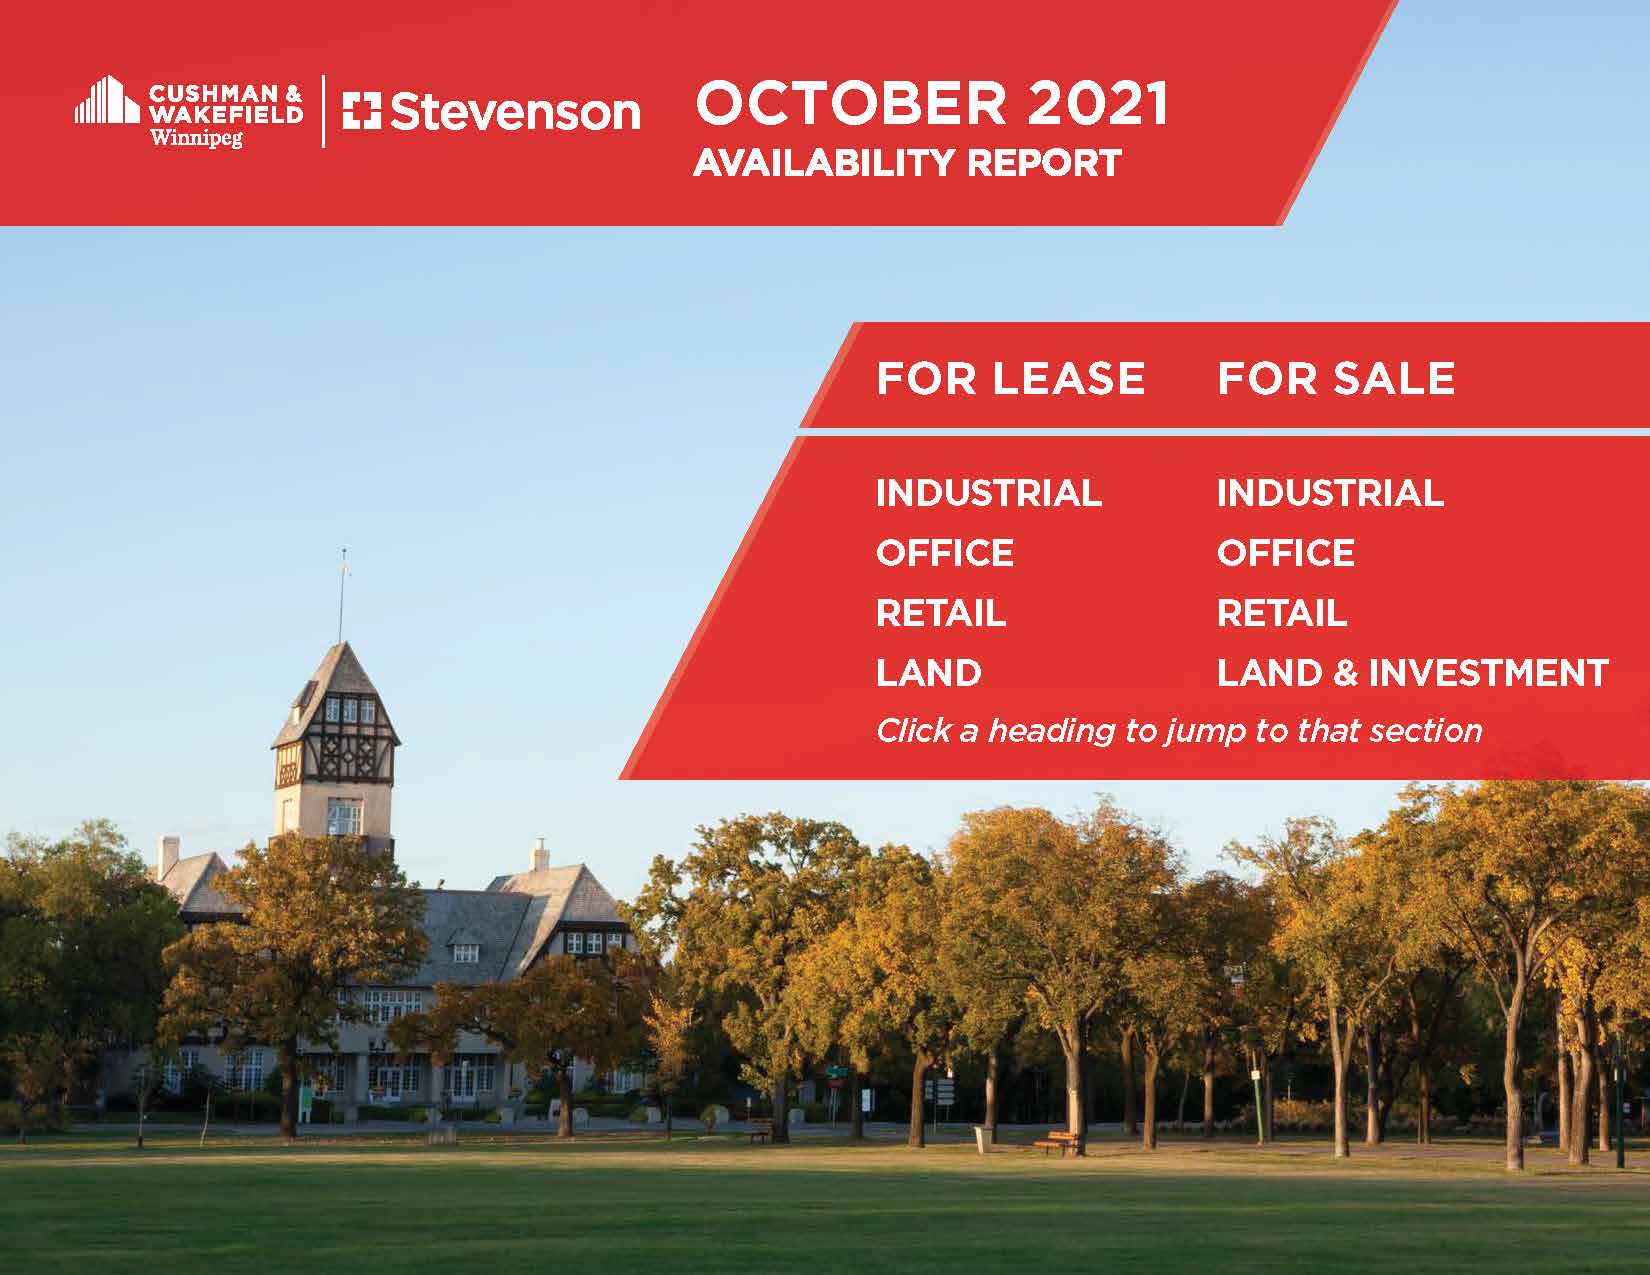 CWStevenson january 2022 availability report of properties industrial office retail land investments october 2021